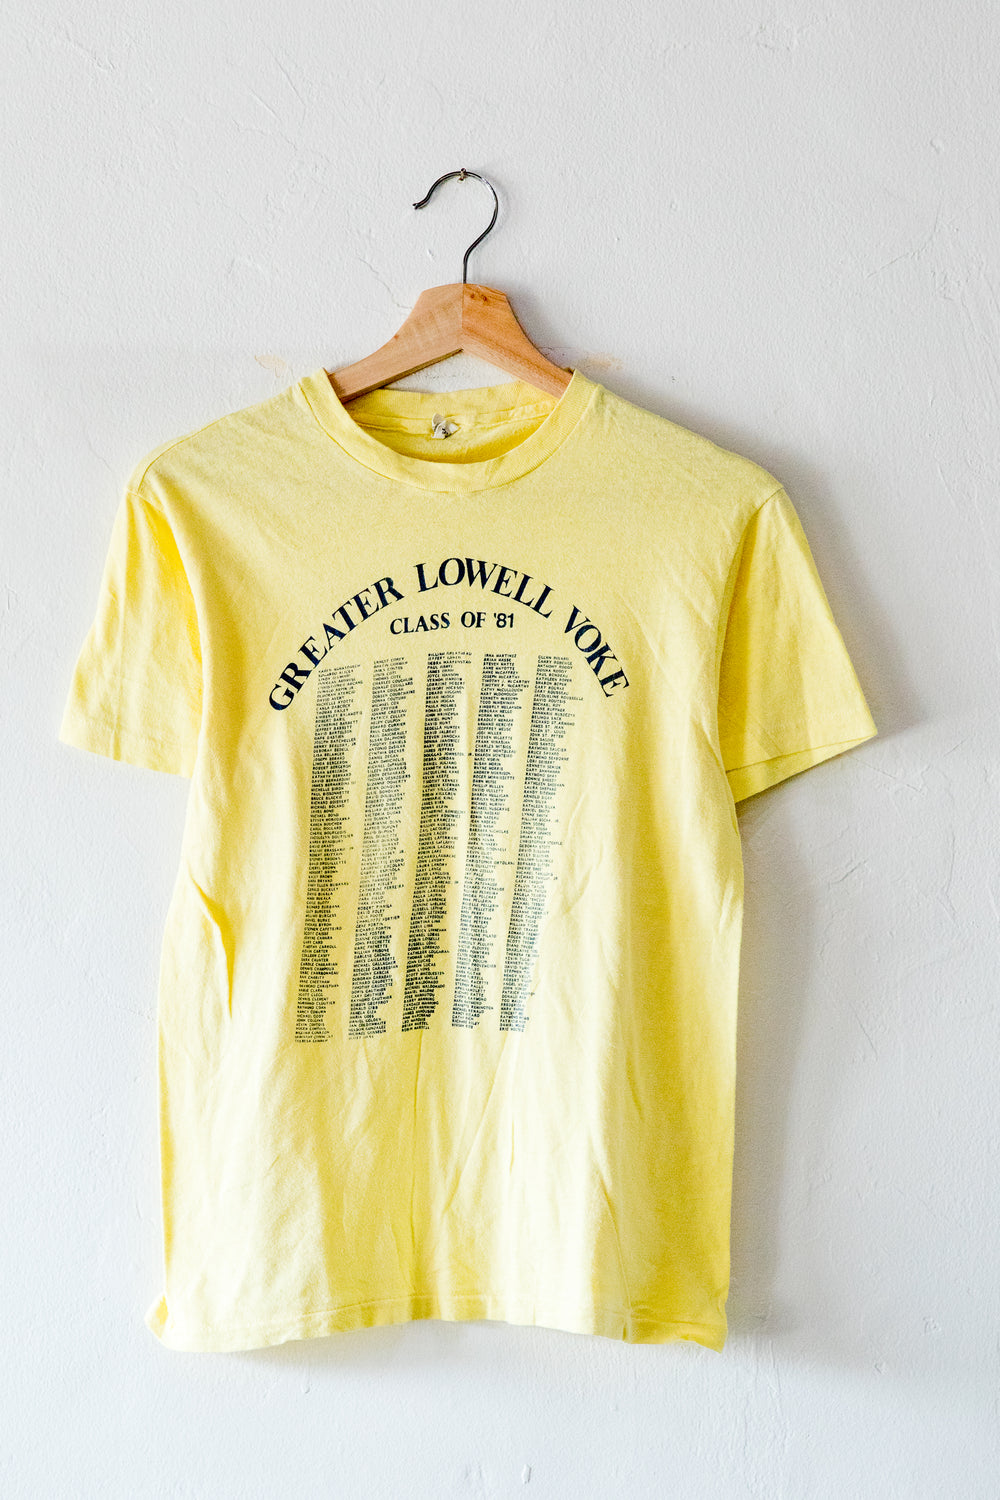 Greater Lowell Tee